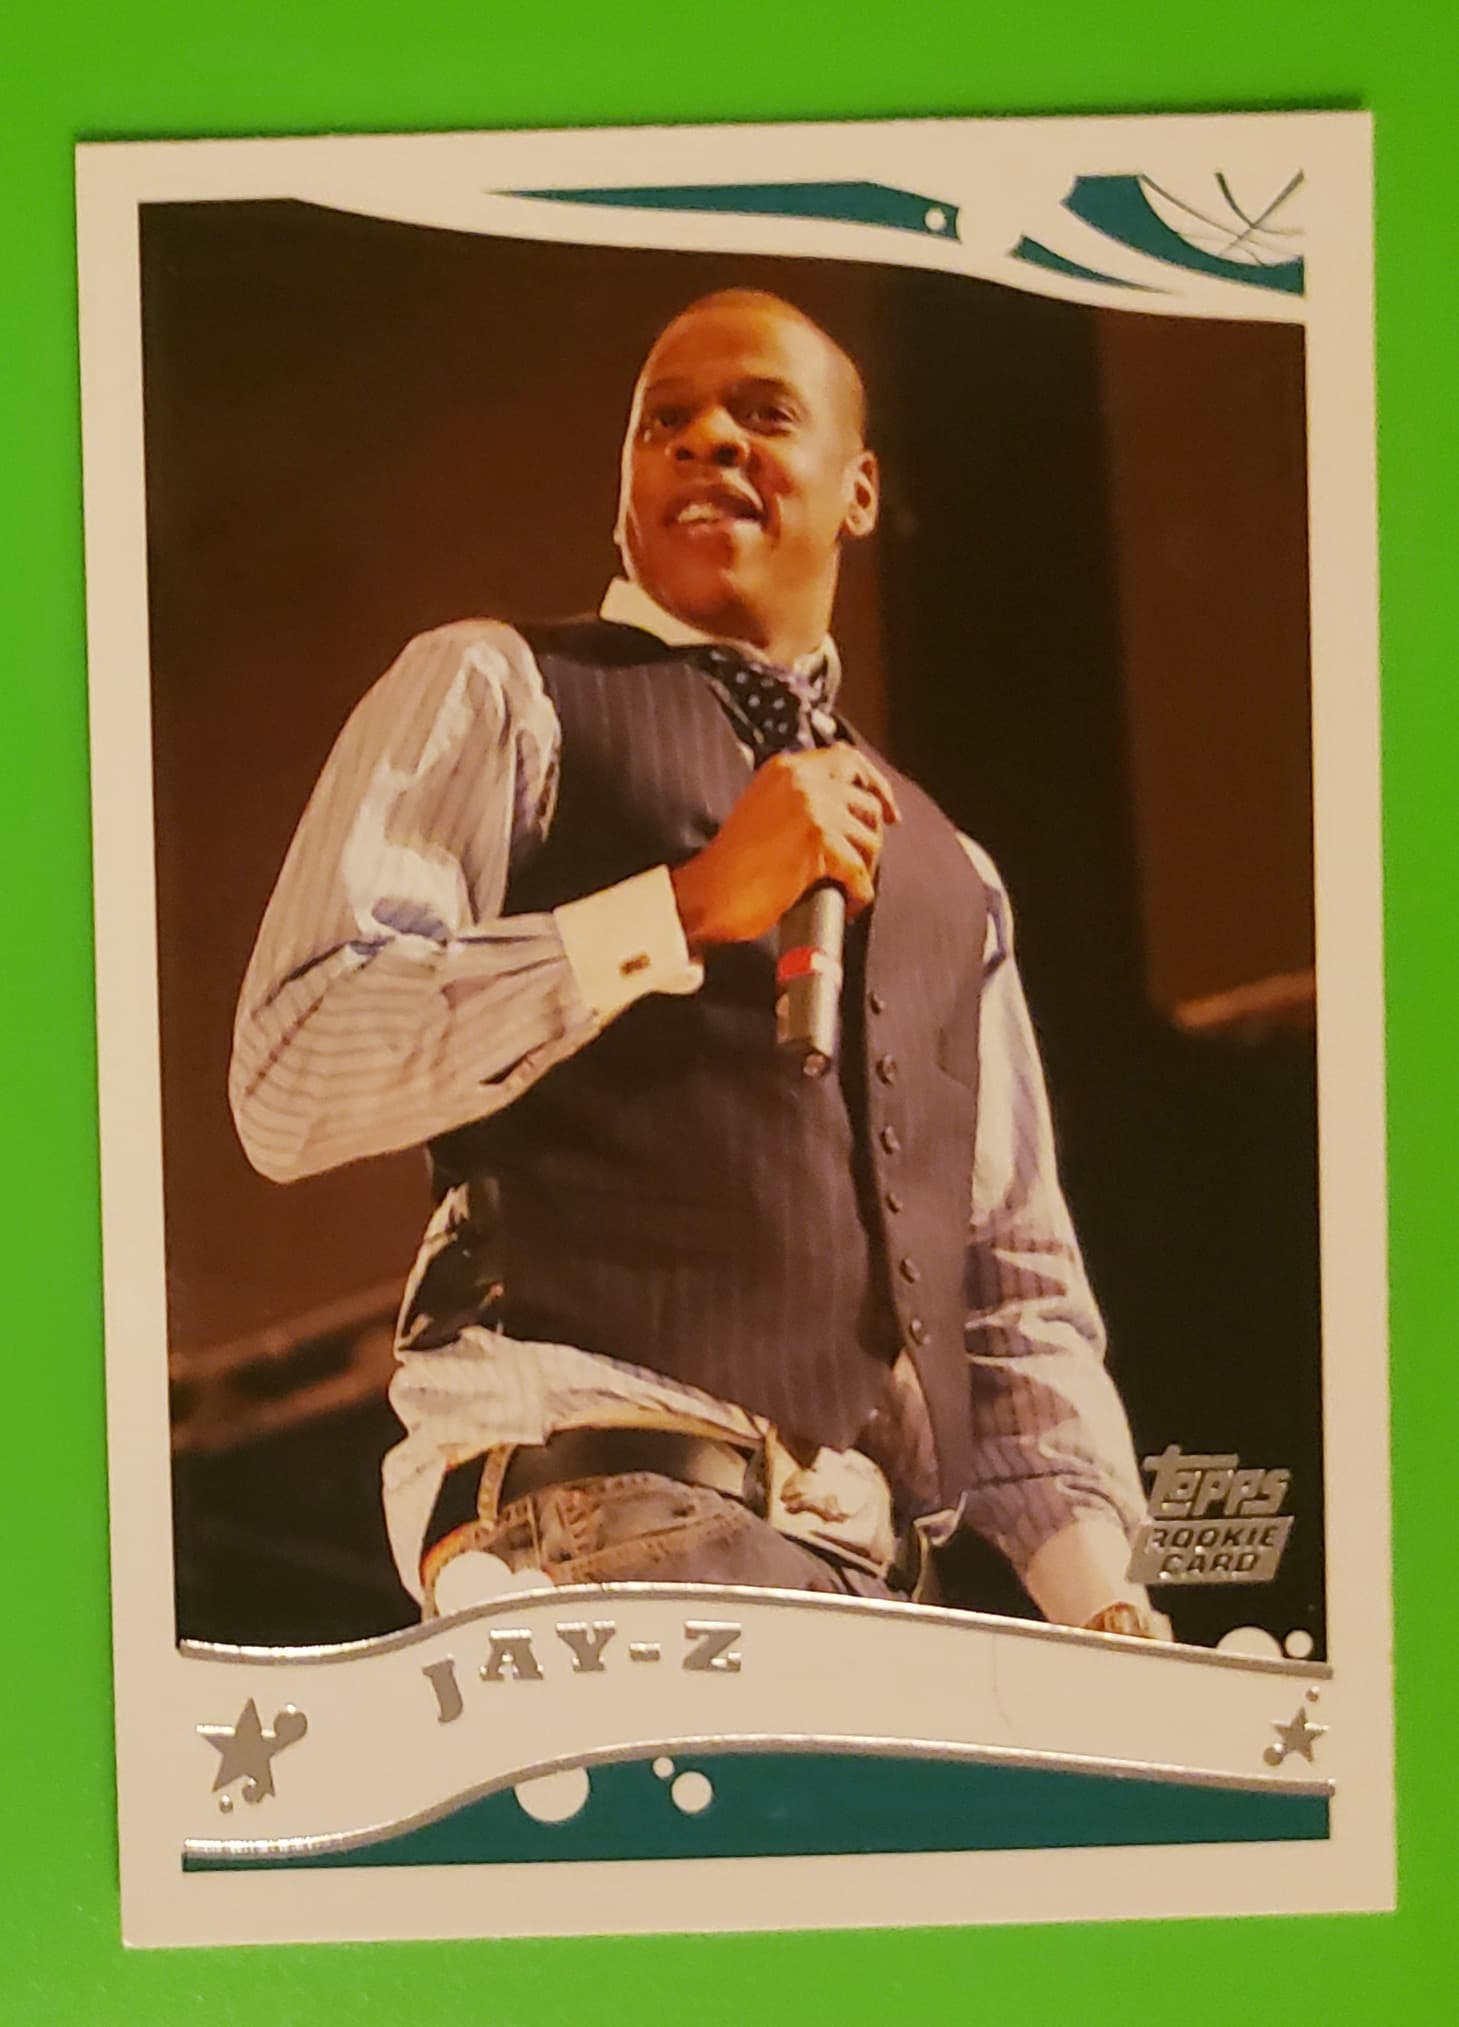 2005 Topps Jay-Z Rookie Cards Rising in Value